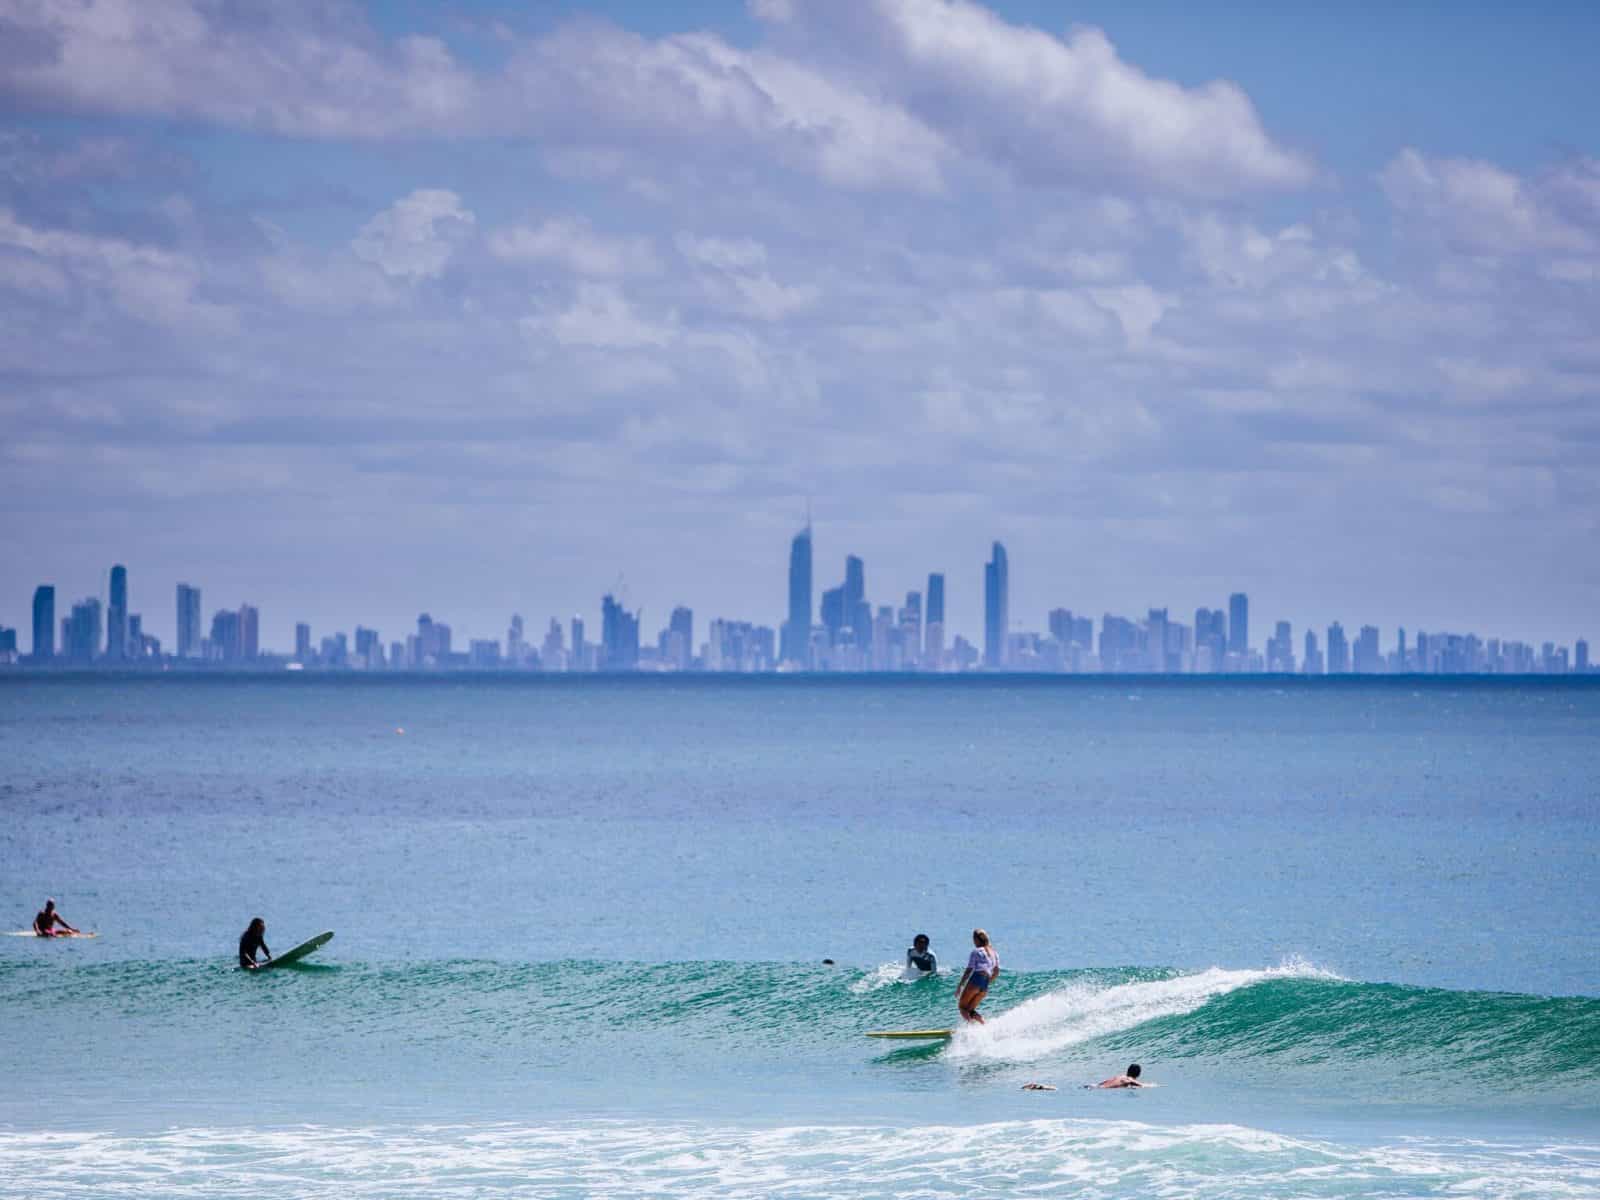 View of the Gold Coast from Kirra Point